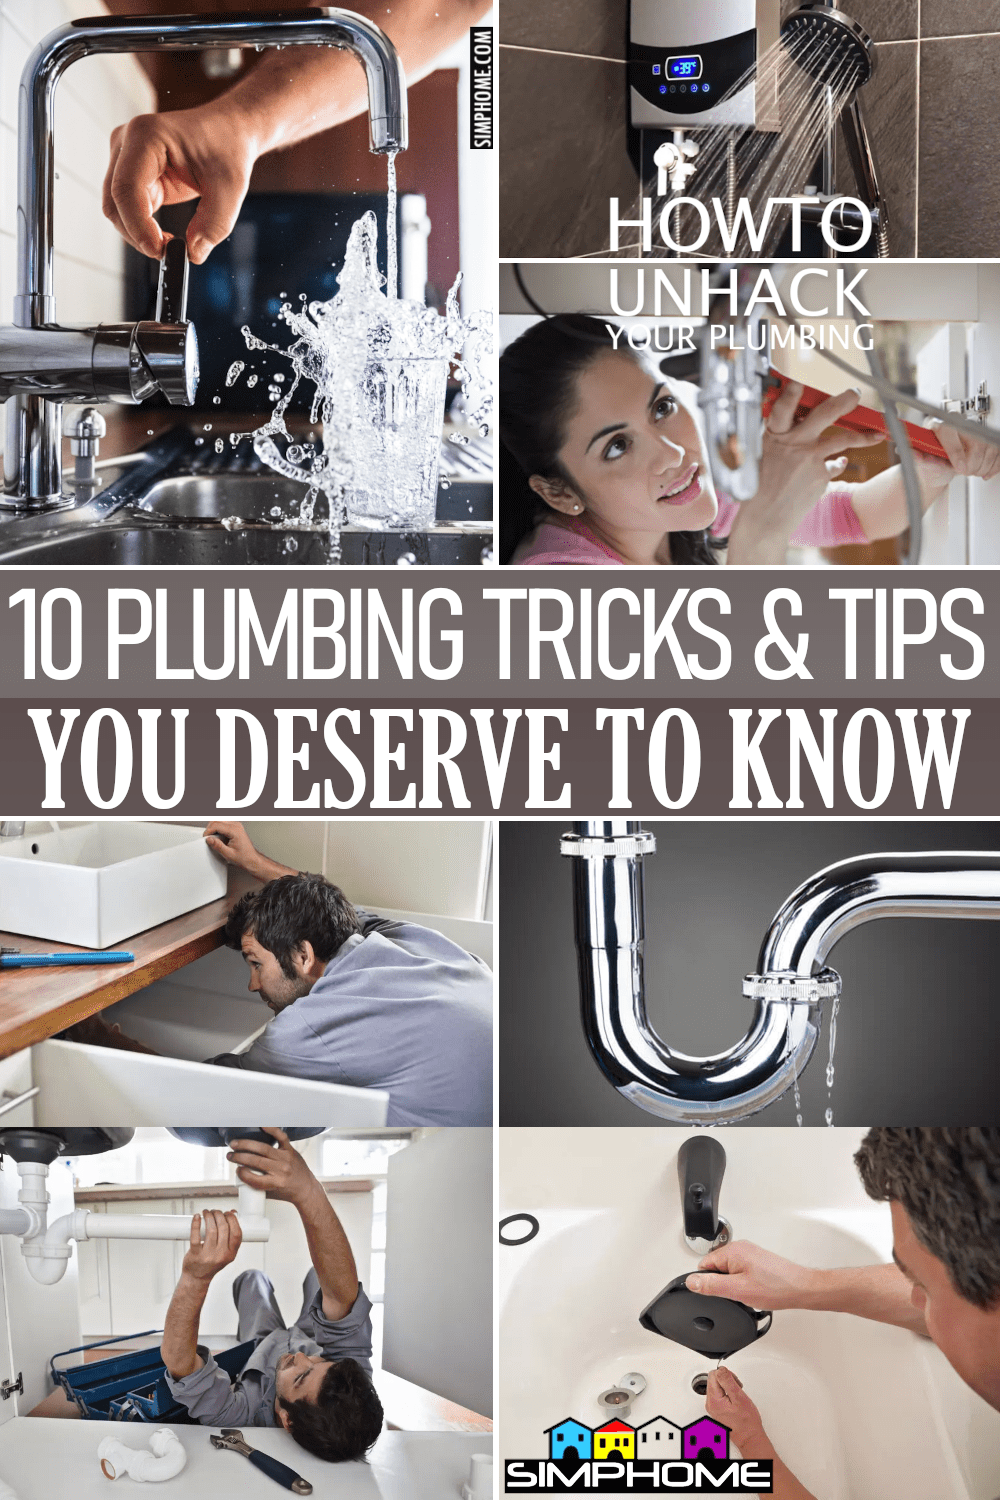 10 Plumbing Tips and Tricks via Simphome.comFeatured